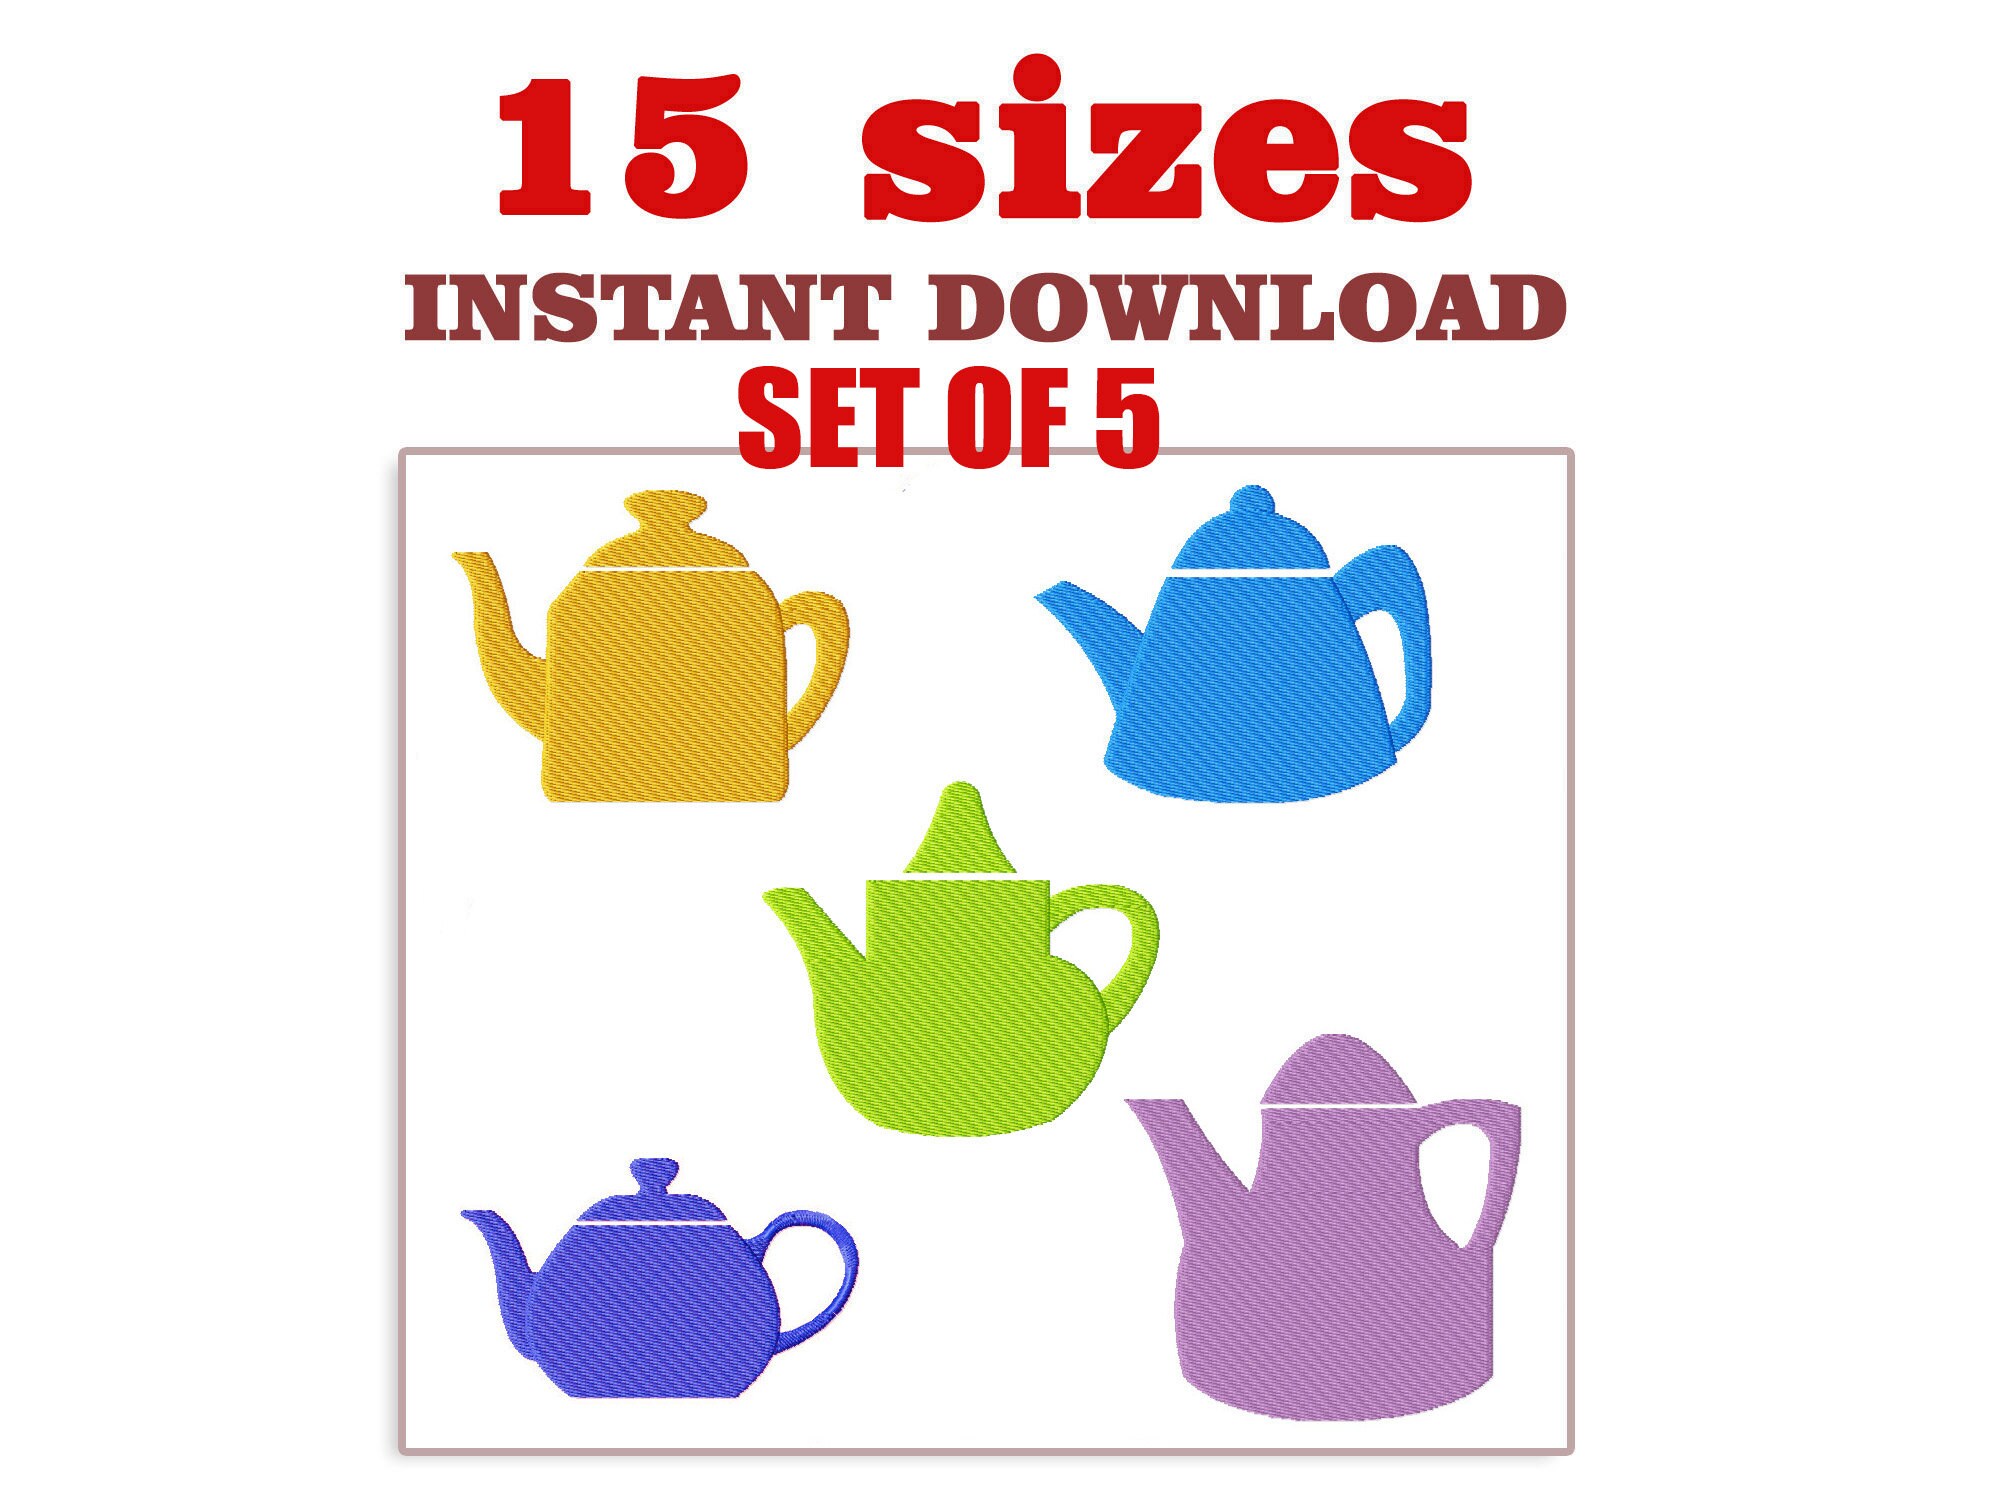 How to Use a Teapot: A Step By Step Guide – ArtfulTea